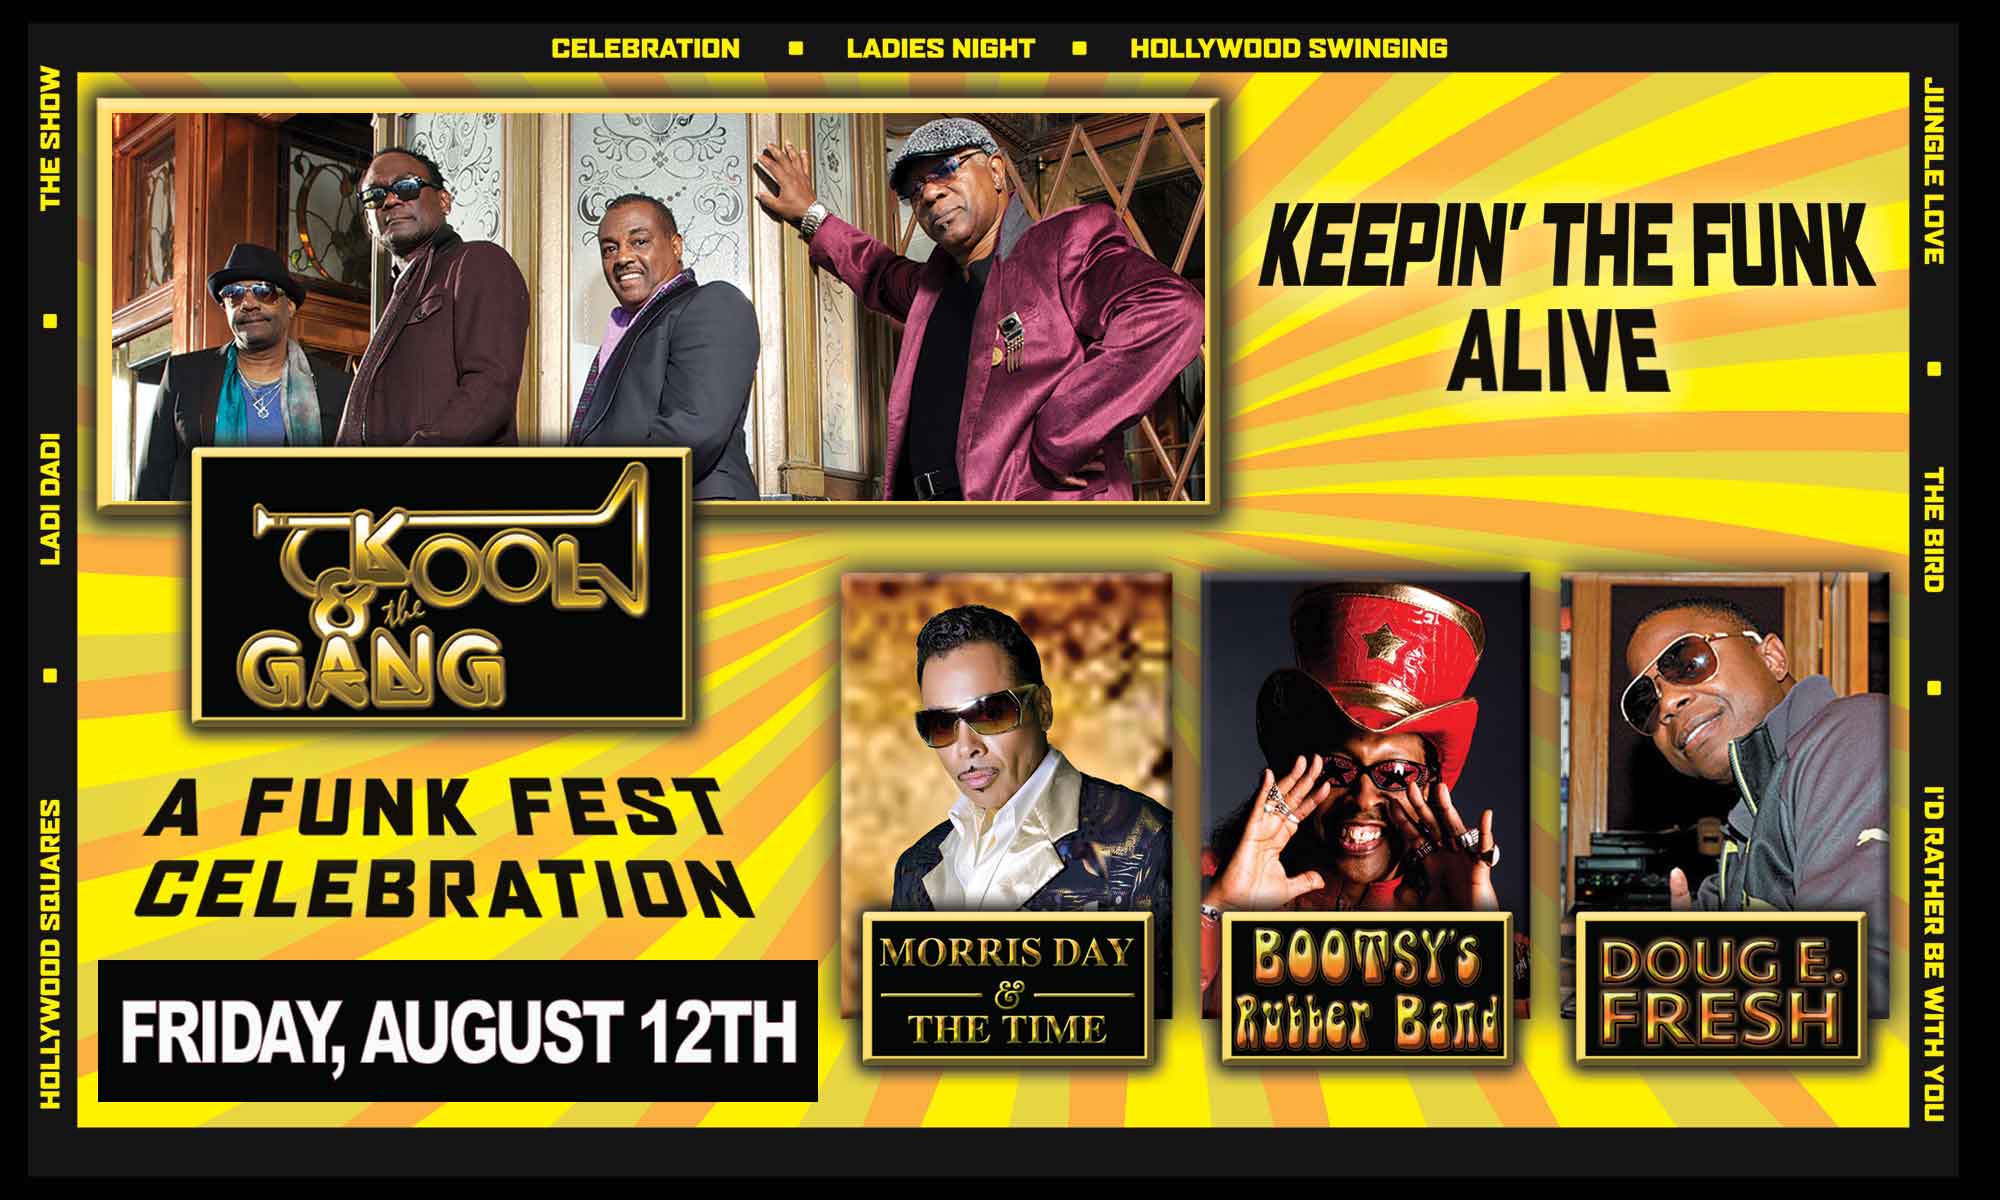 Kool and The Gang - A Funk Fest Celebration at Coney Island Amphitheater on 08-12-16